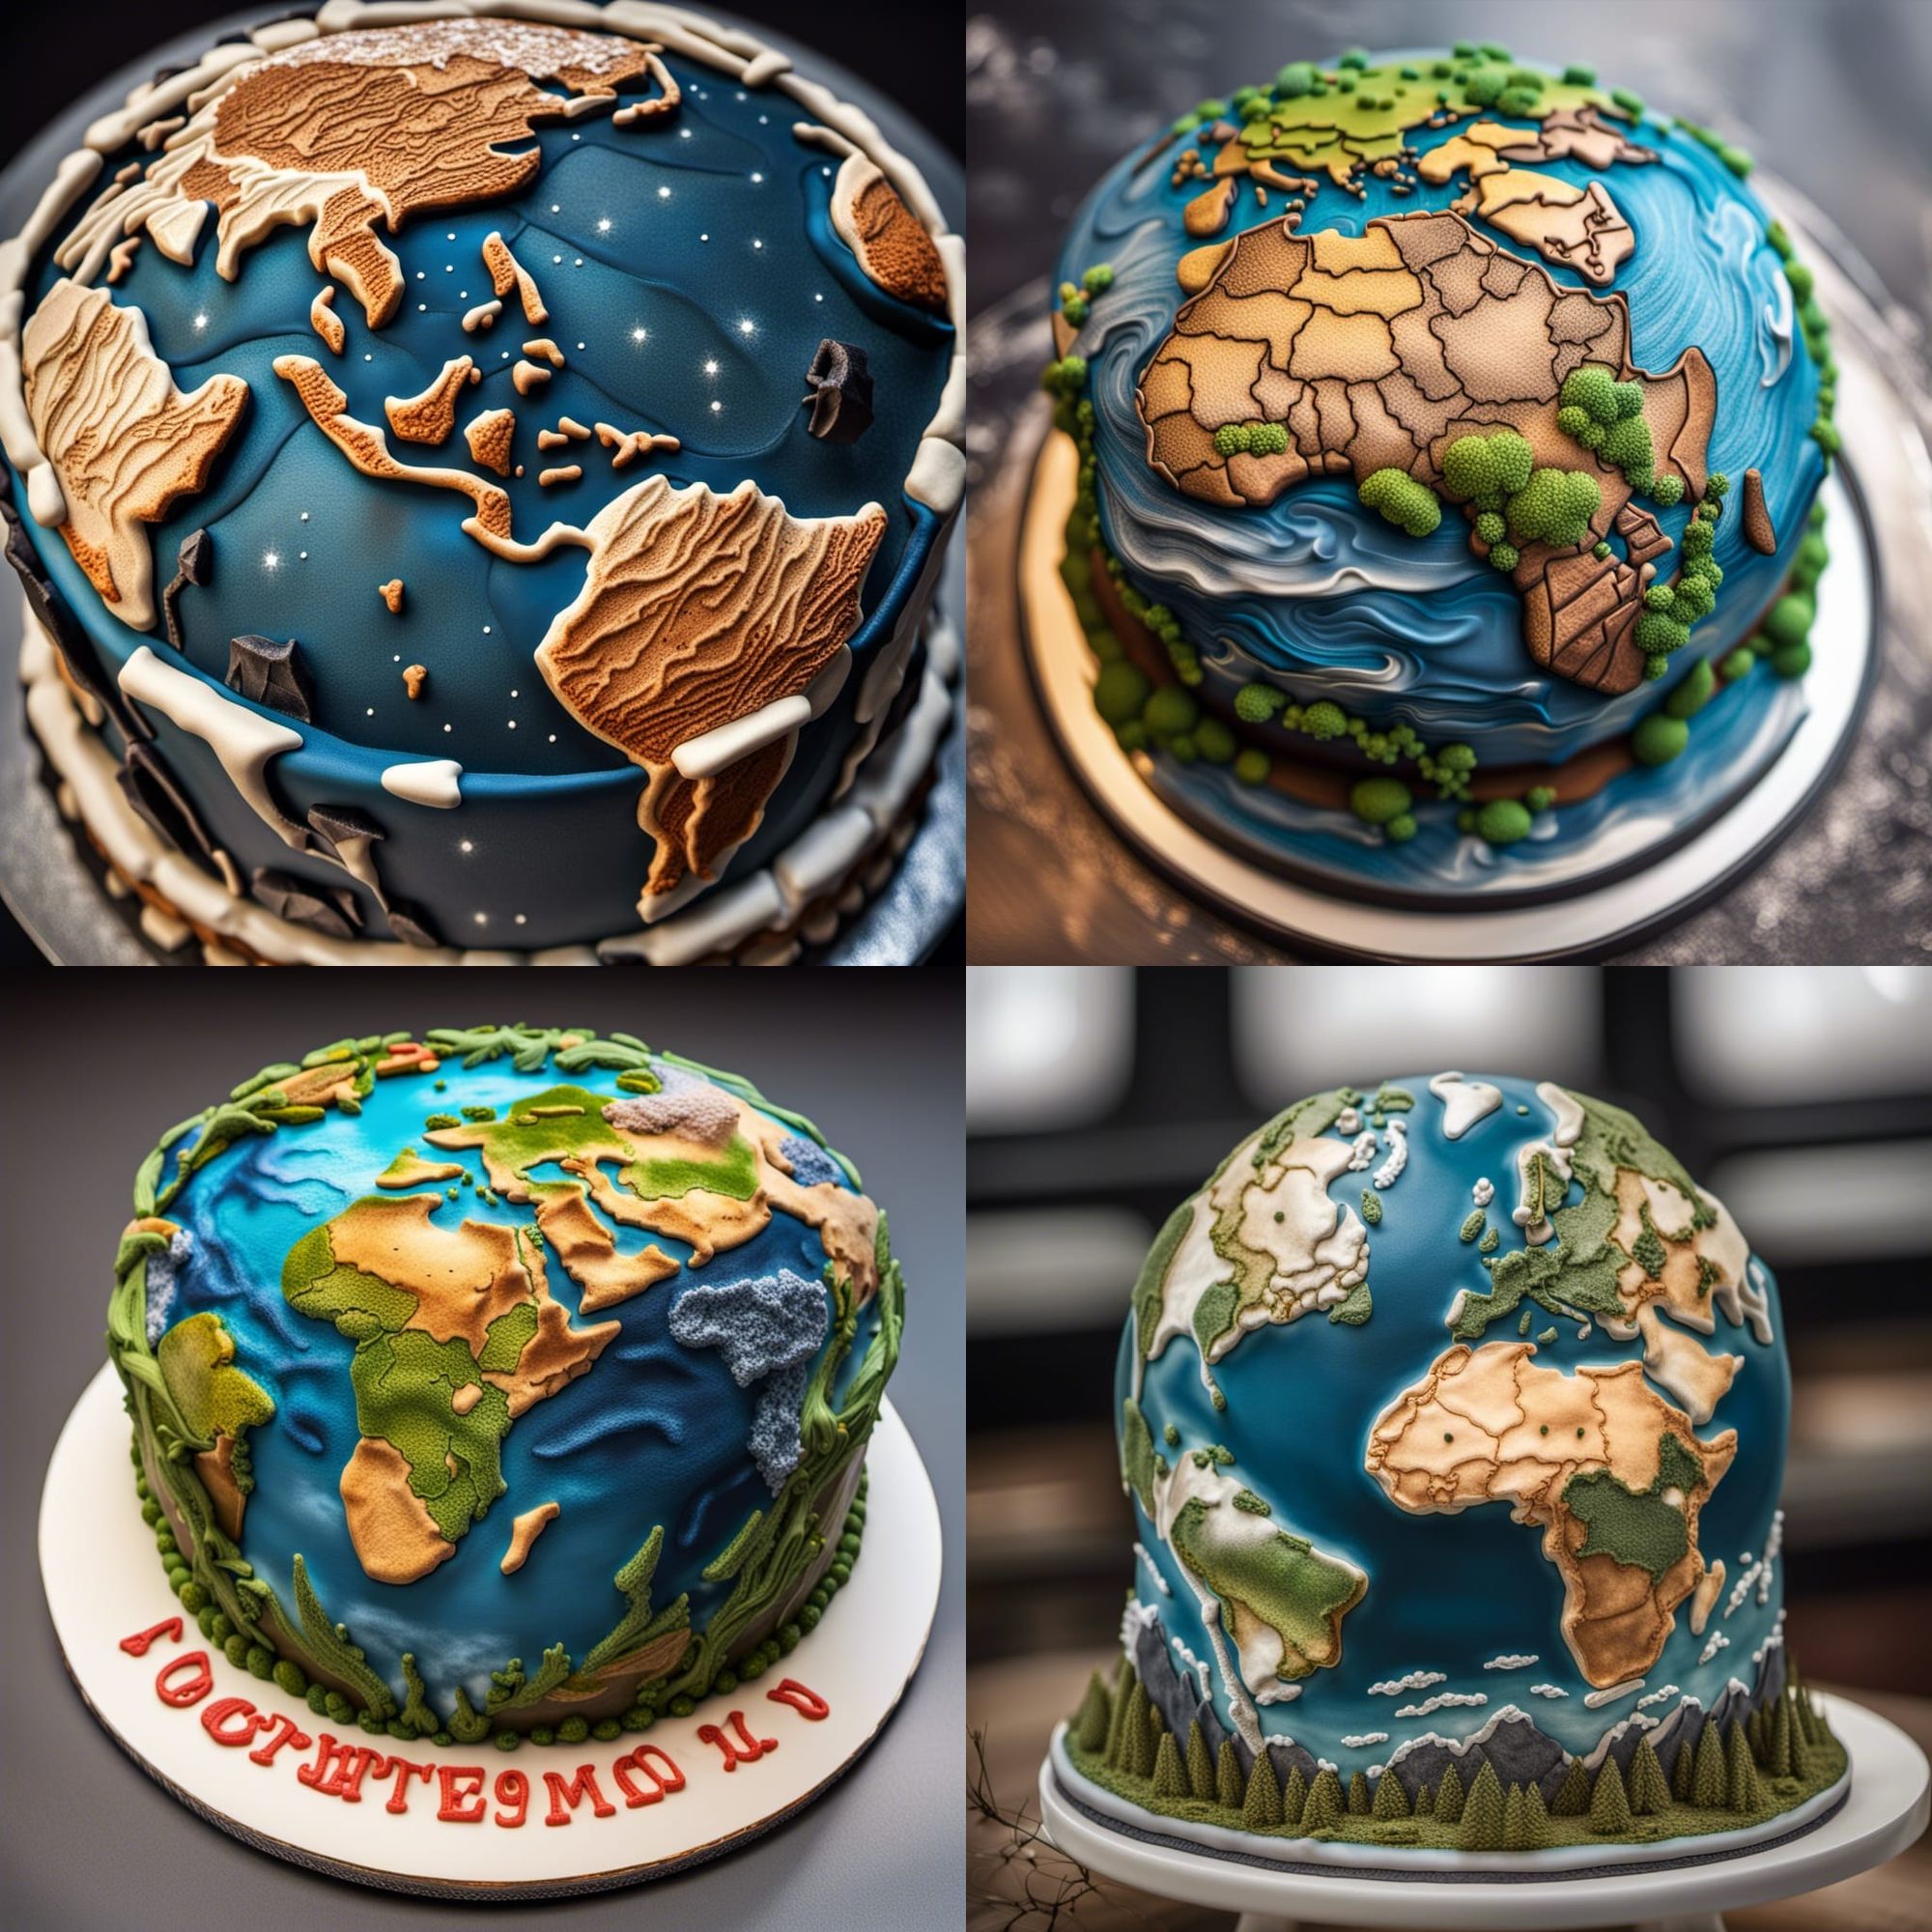 Planet earth themed cake on Craiyon